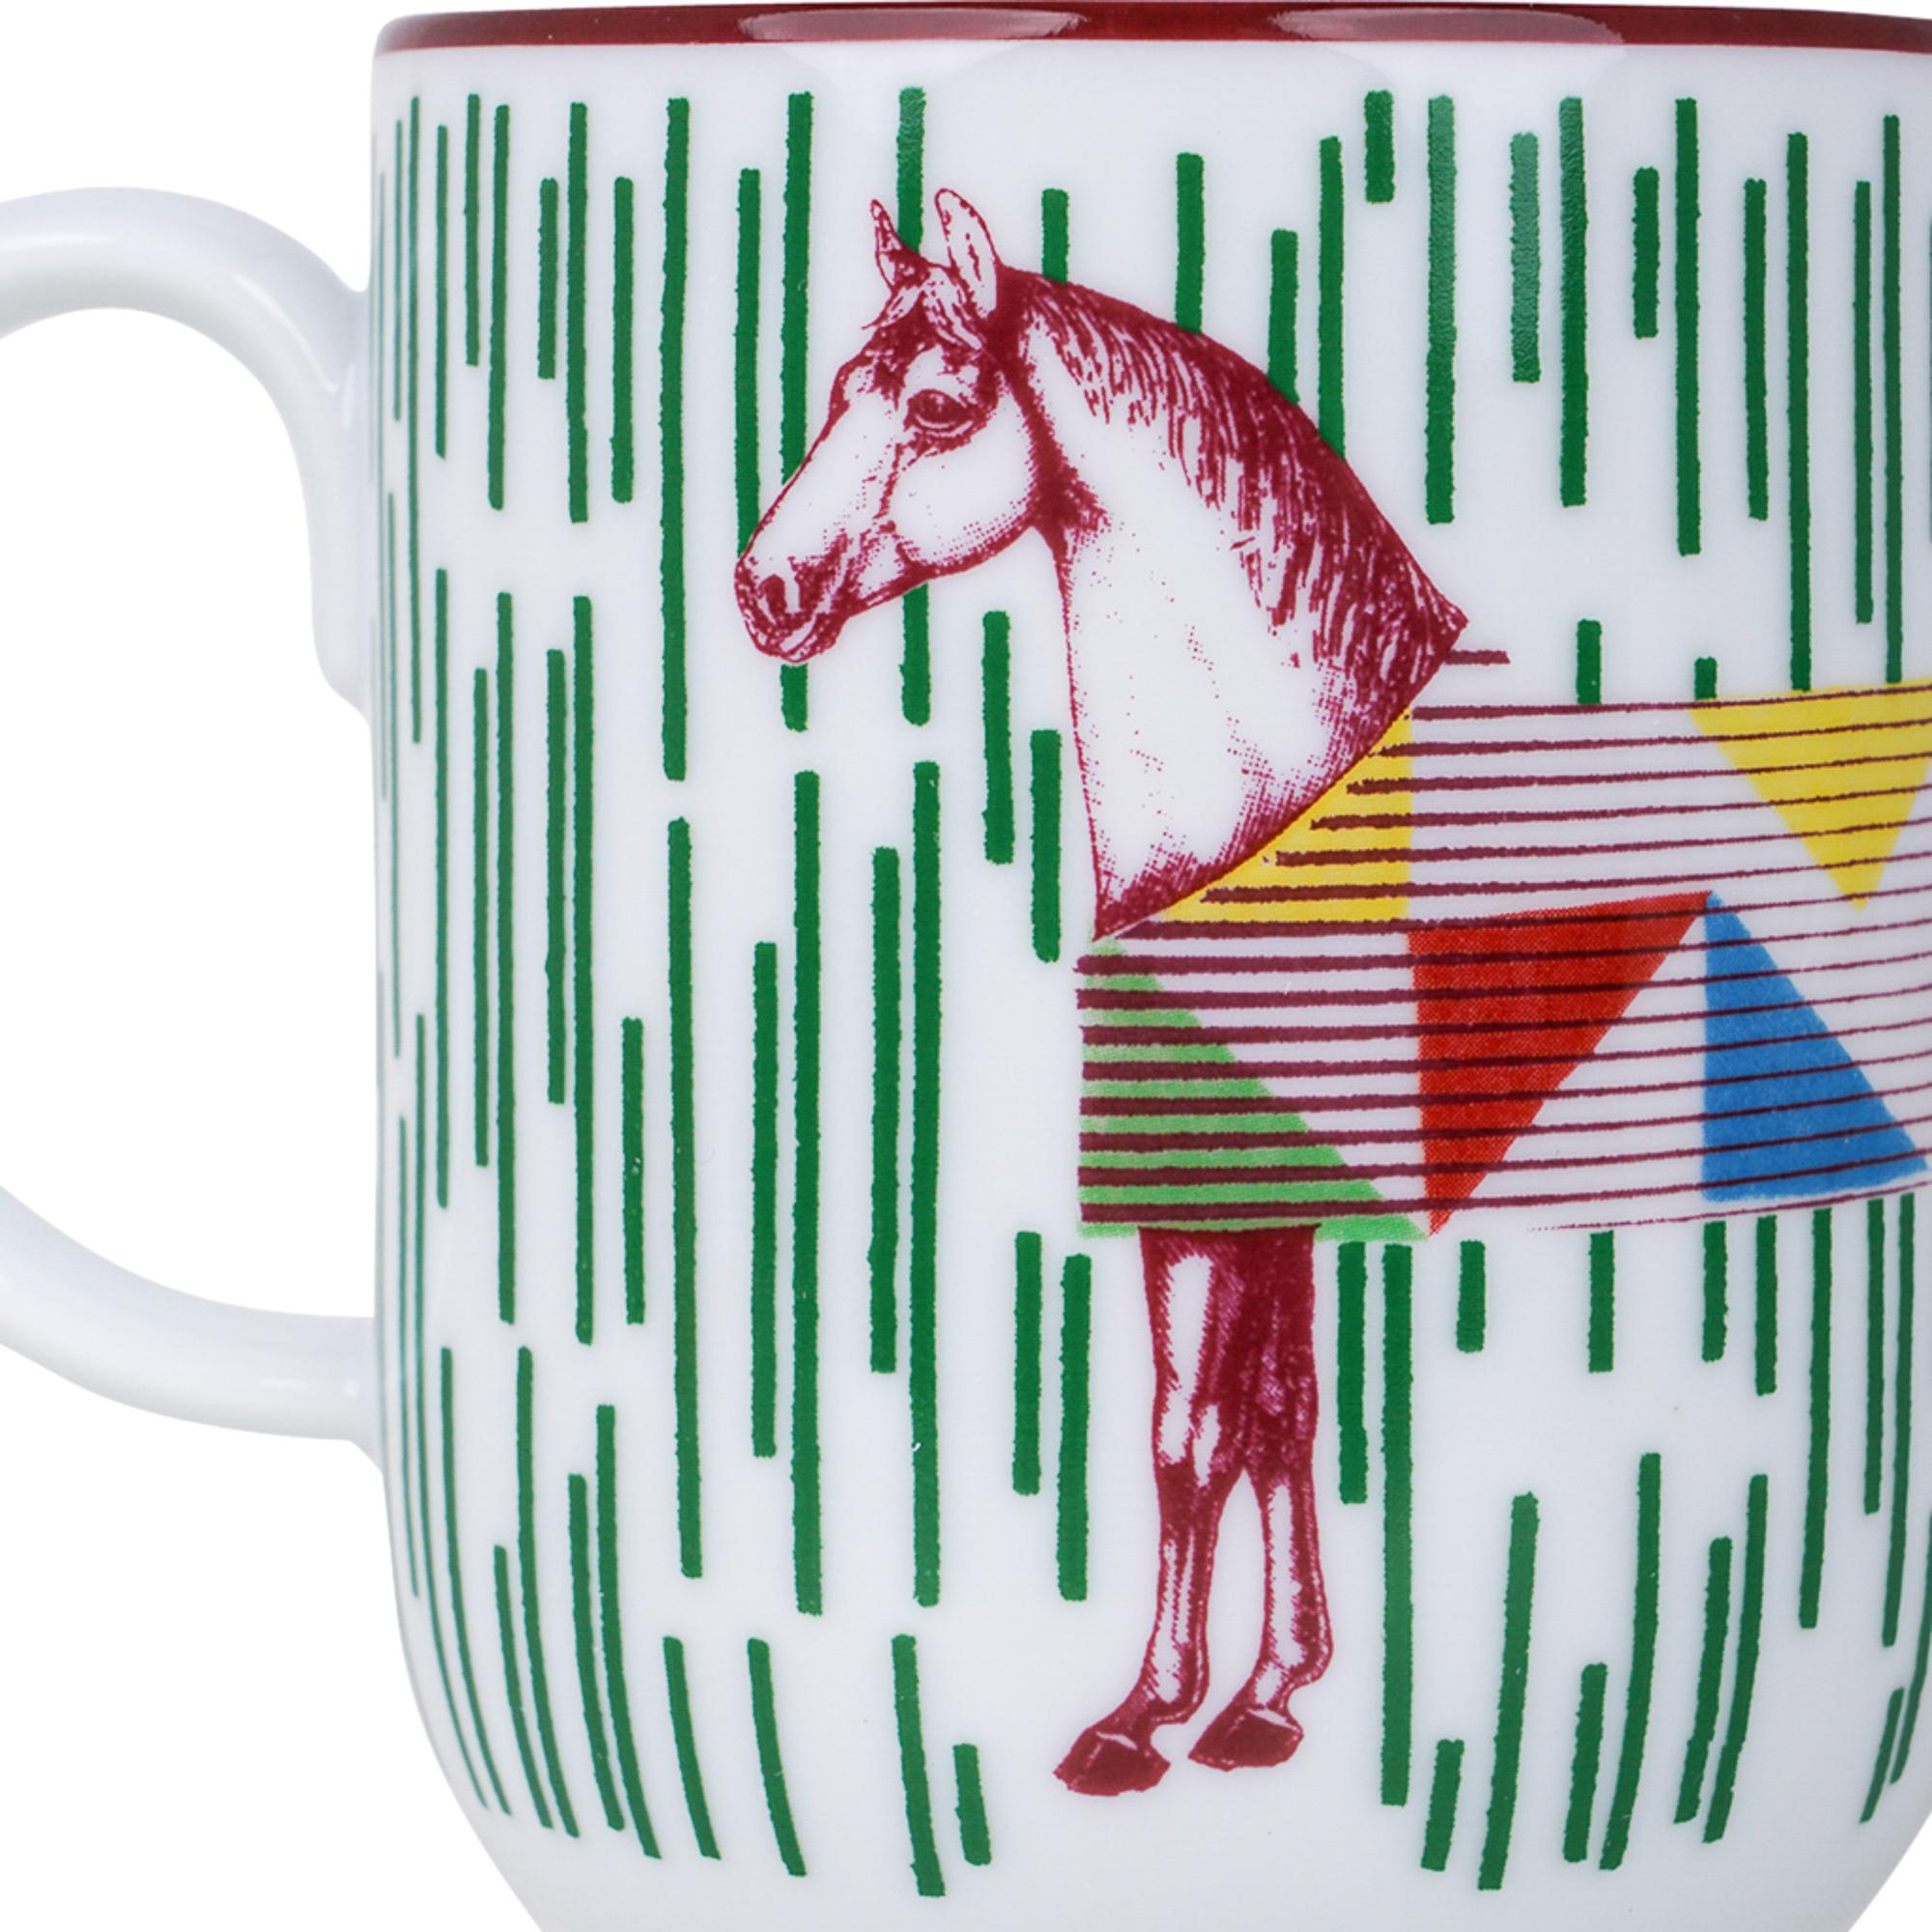 Mightychic offers an Hermes Hippomobile set of three (3) coffee mugs.
Designed by Gianpaolo Pagni and decorated using chromolithography.
Depicts a whimsical 